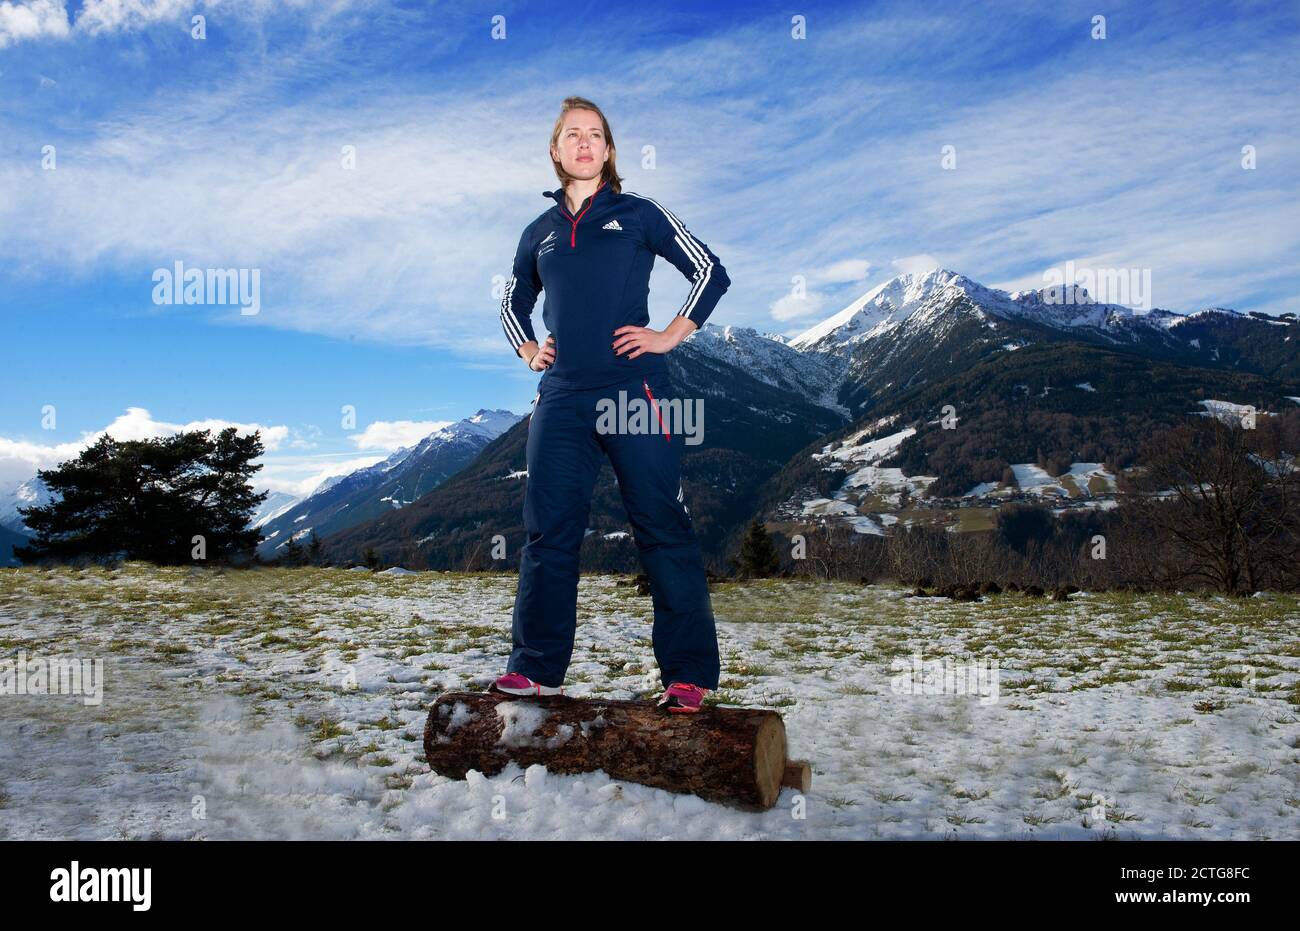 GB SKELETON GOLD MEDAL HOPE LIZZY YARNOLD ON LOCATION IN IGLS, AUSTRIA.  PICTURE CREDIT © MARK PAIN / ALAMY Stock Photo